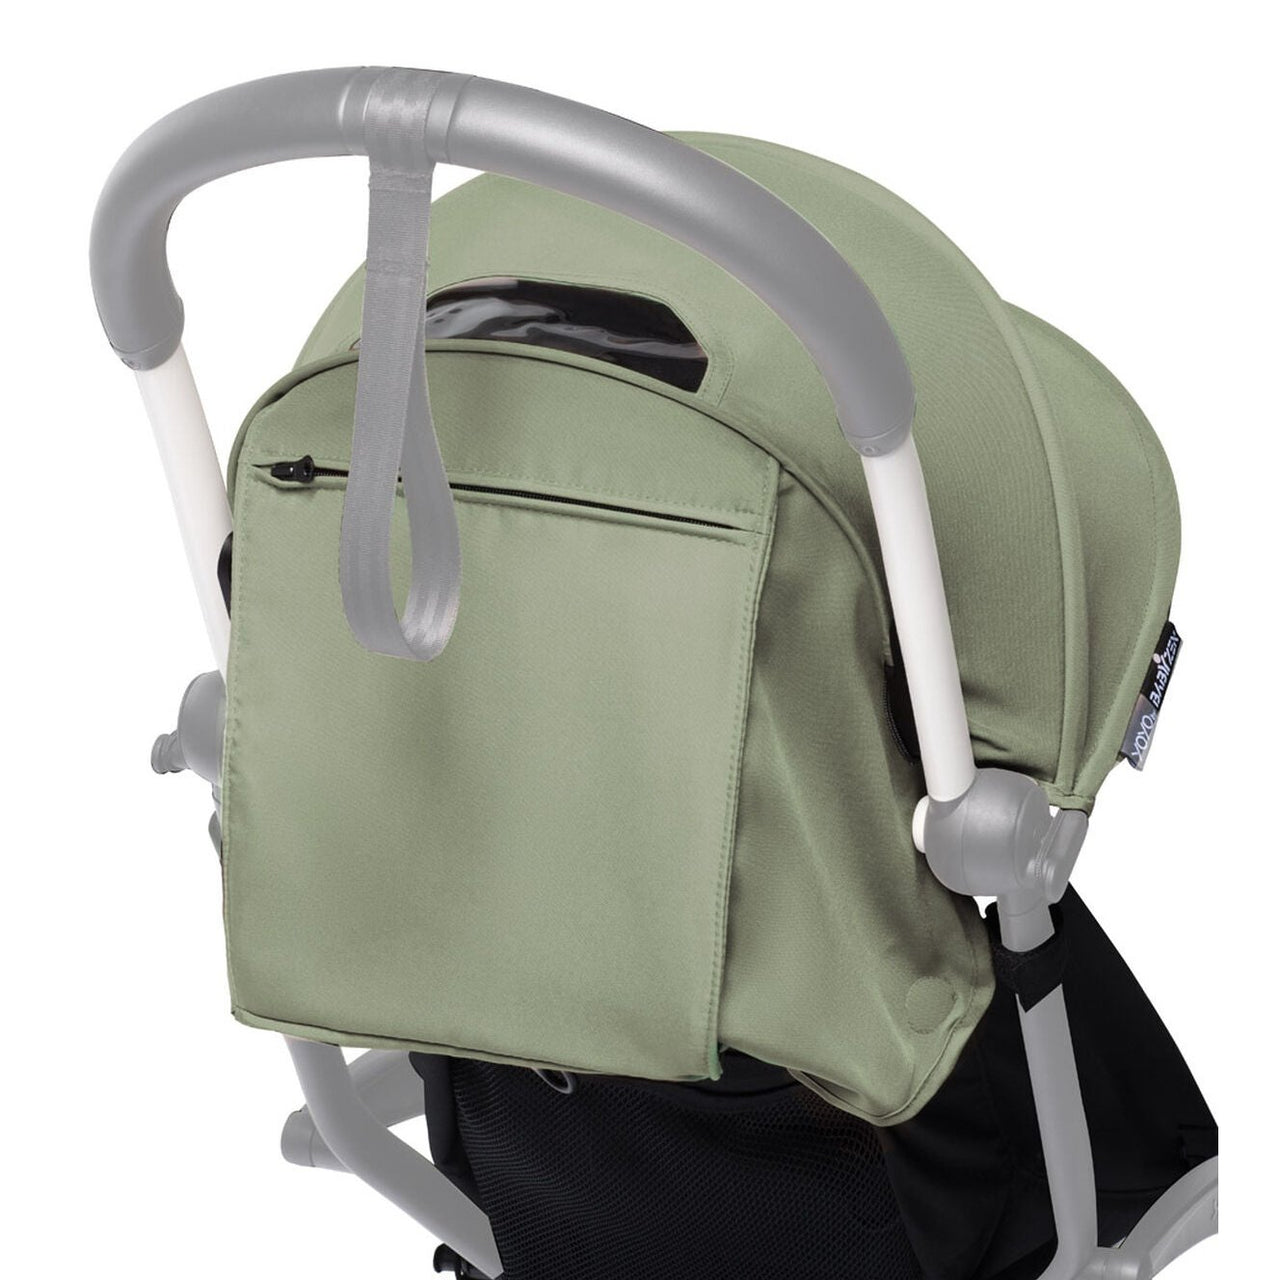 BABYZEN  YOYO² (white frame) complete with newborn  - Olive with FREE BACKPACK